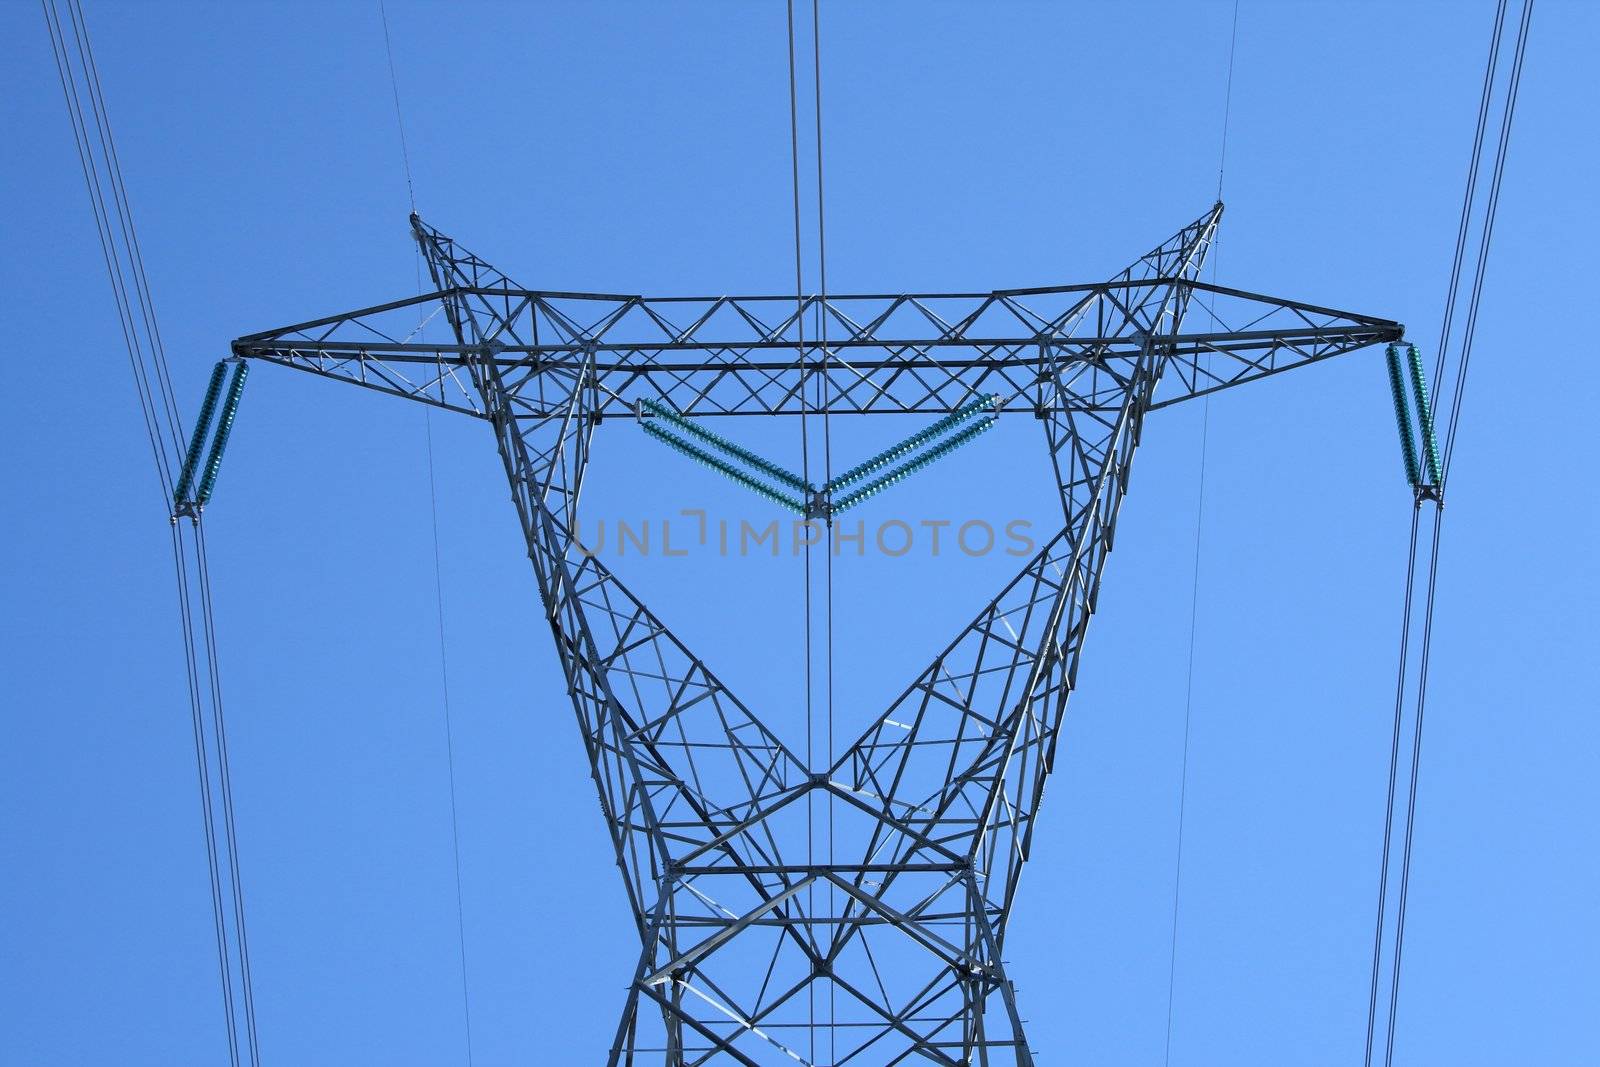 Top of the huge high voltage electricity pylon against the sky.